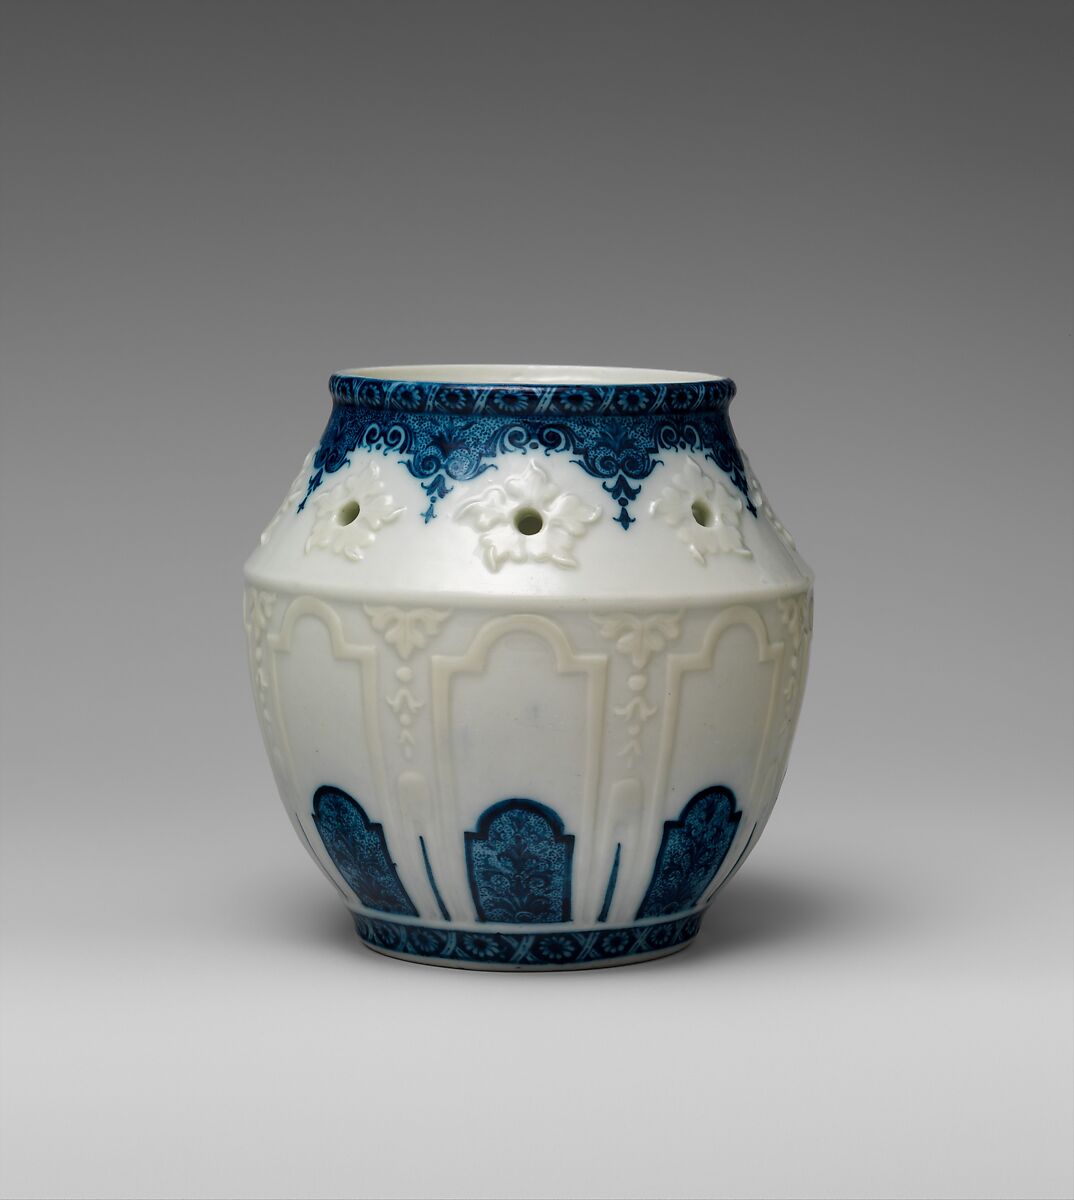 Potpourri jar, Louis Poterat Manufactory (French, early 1690s–1696), Soft-paste porcelain decorated in underglaze blue, French, Rouen 